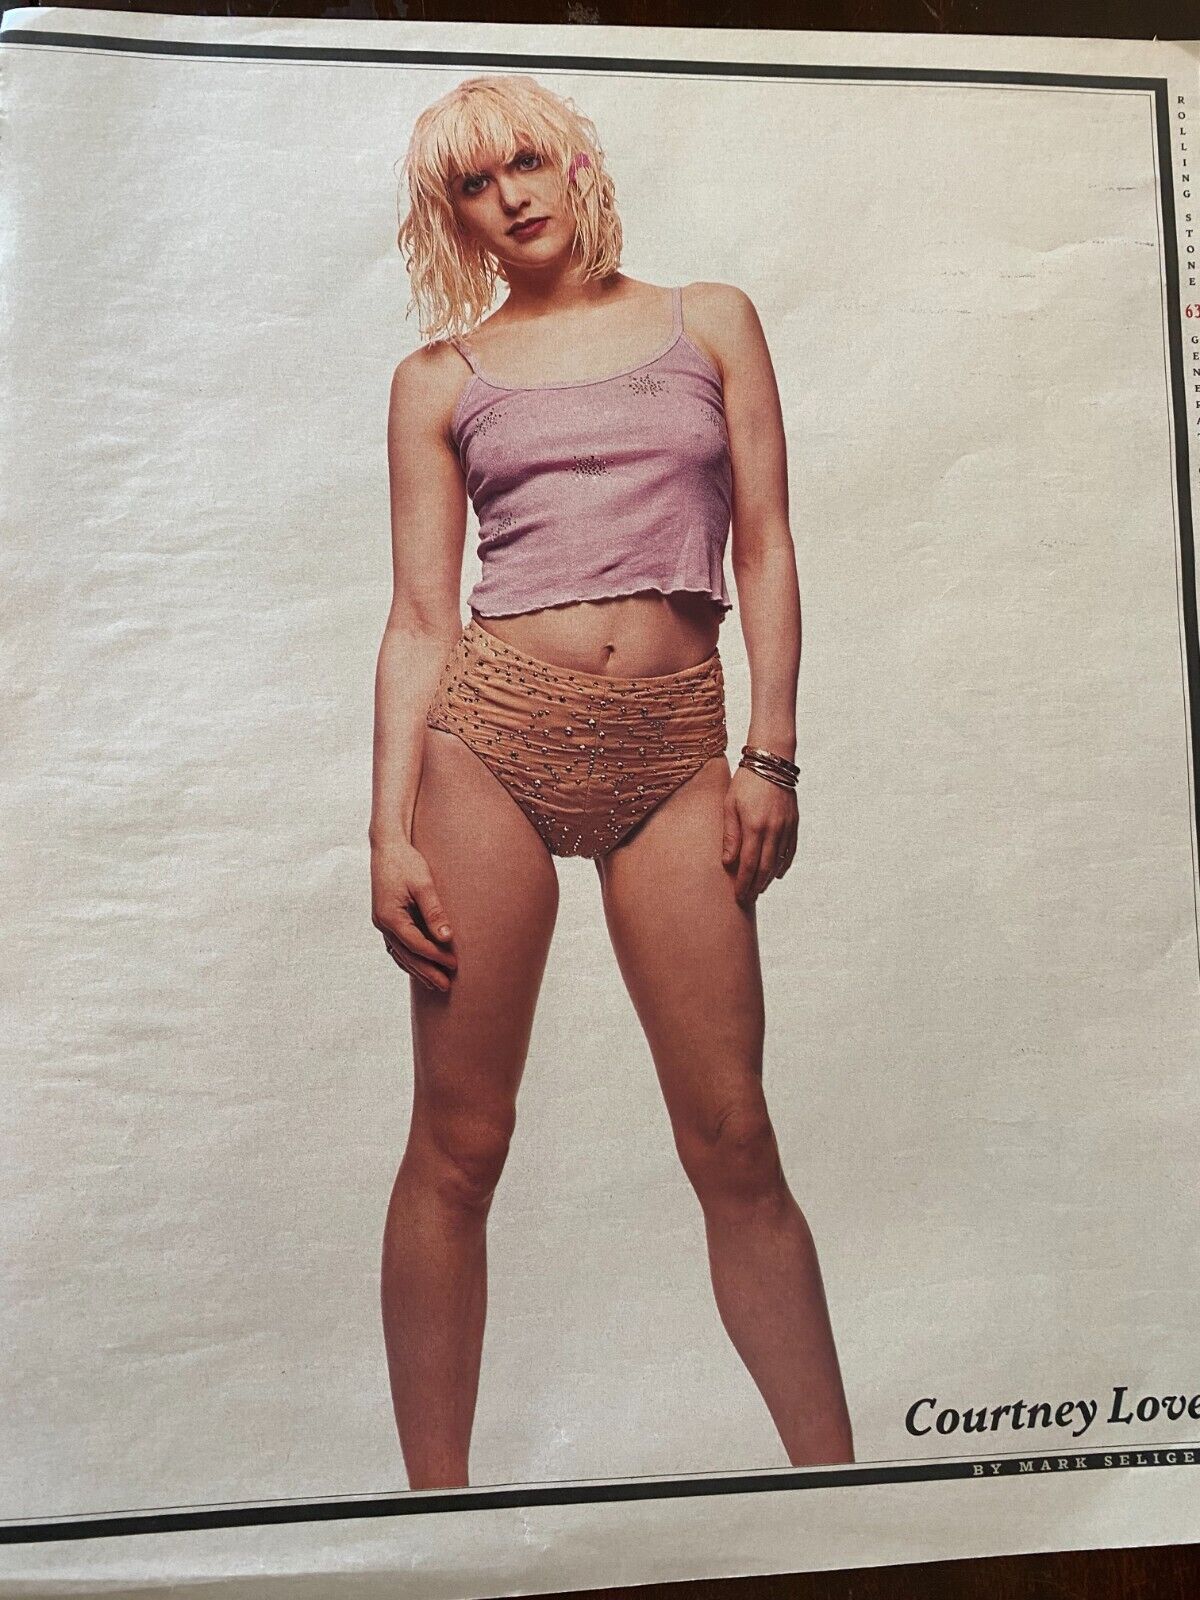 Courtney Love, Full Page Vintage Large Format Pinup